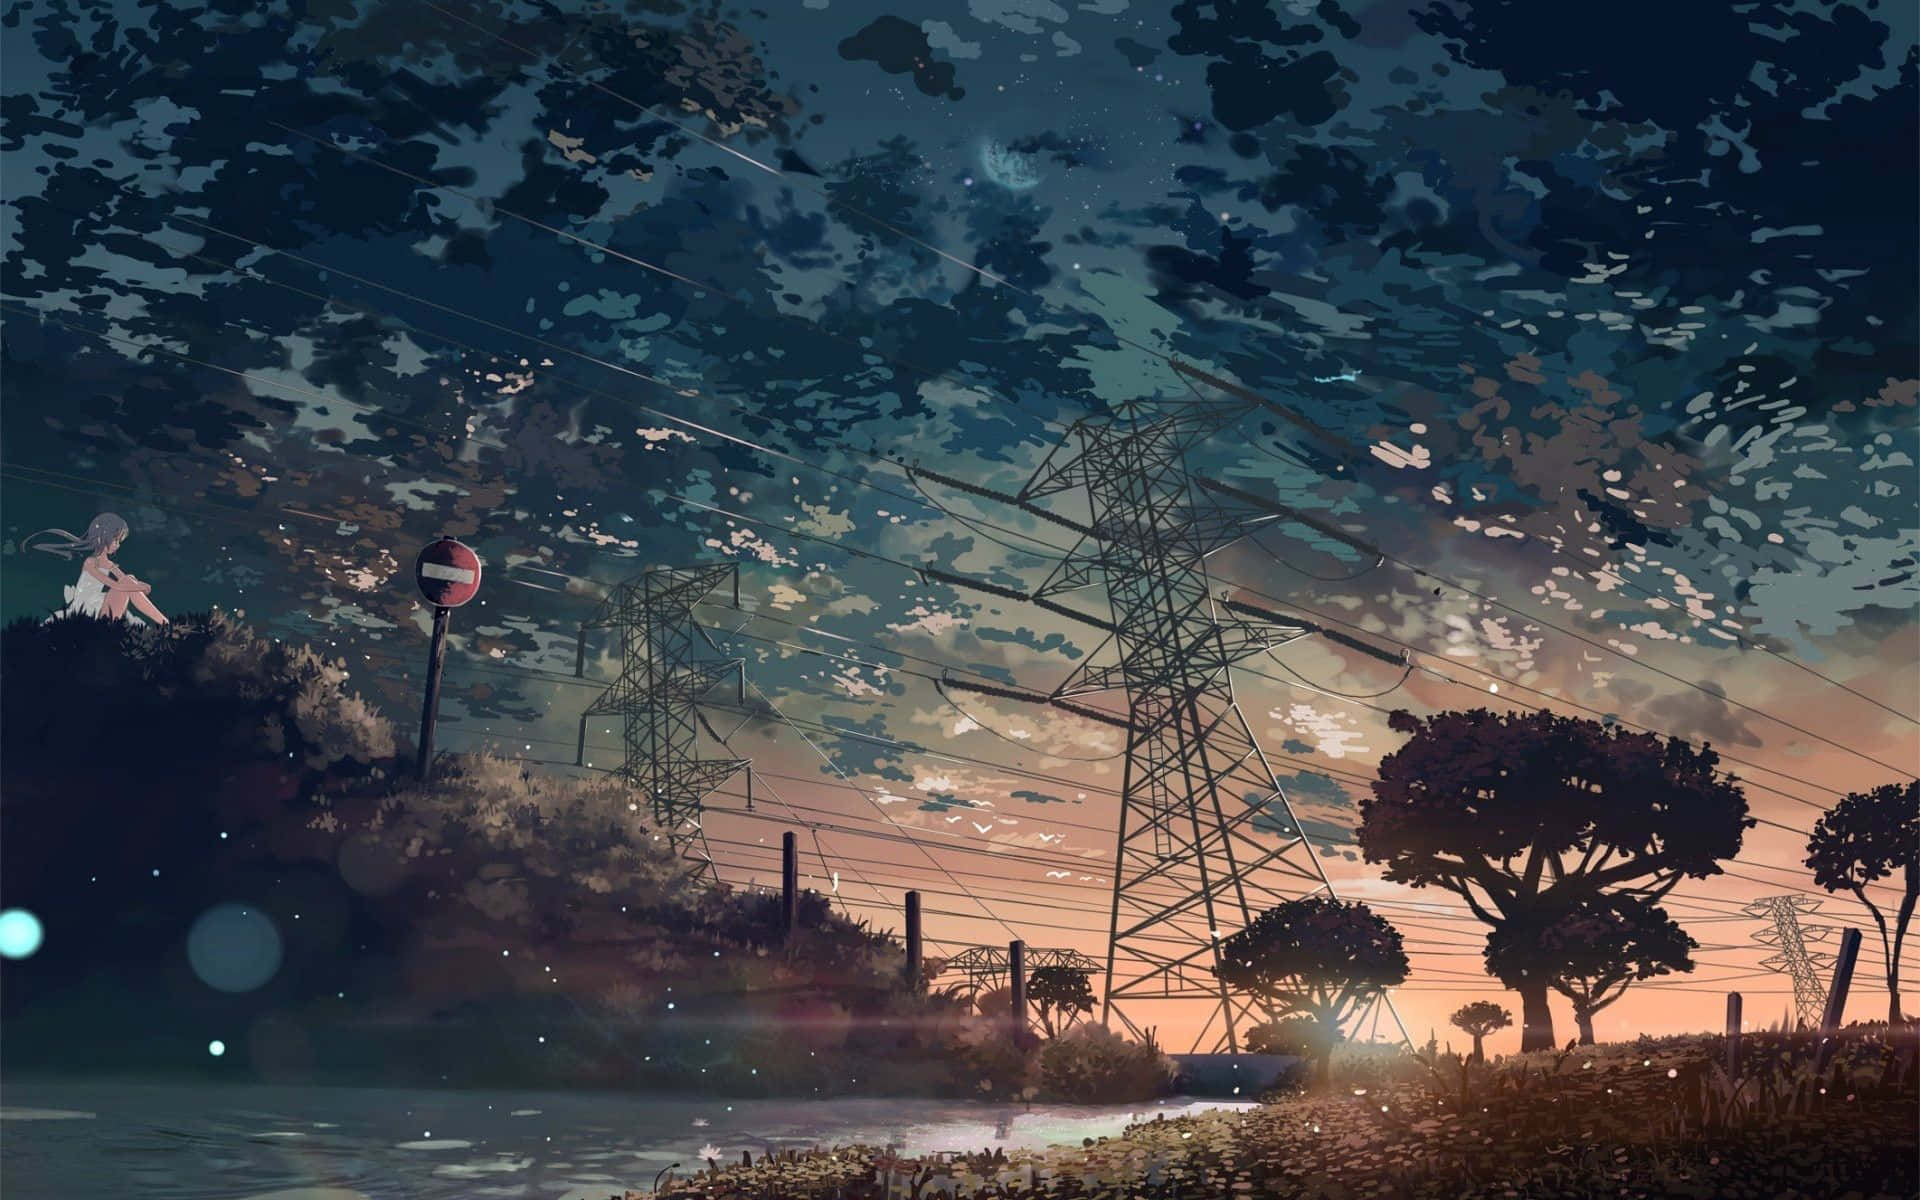 An inspiring and breathtaking scenery from Aesthetic Ghibli Wallpaper